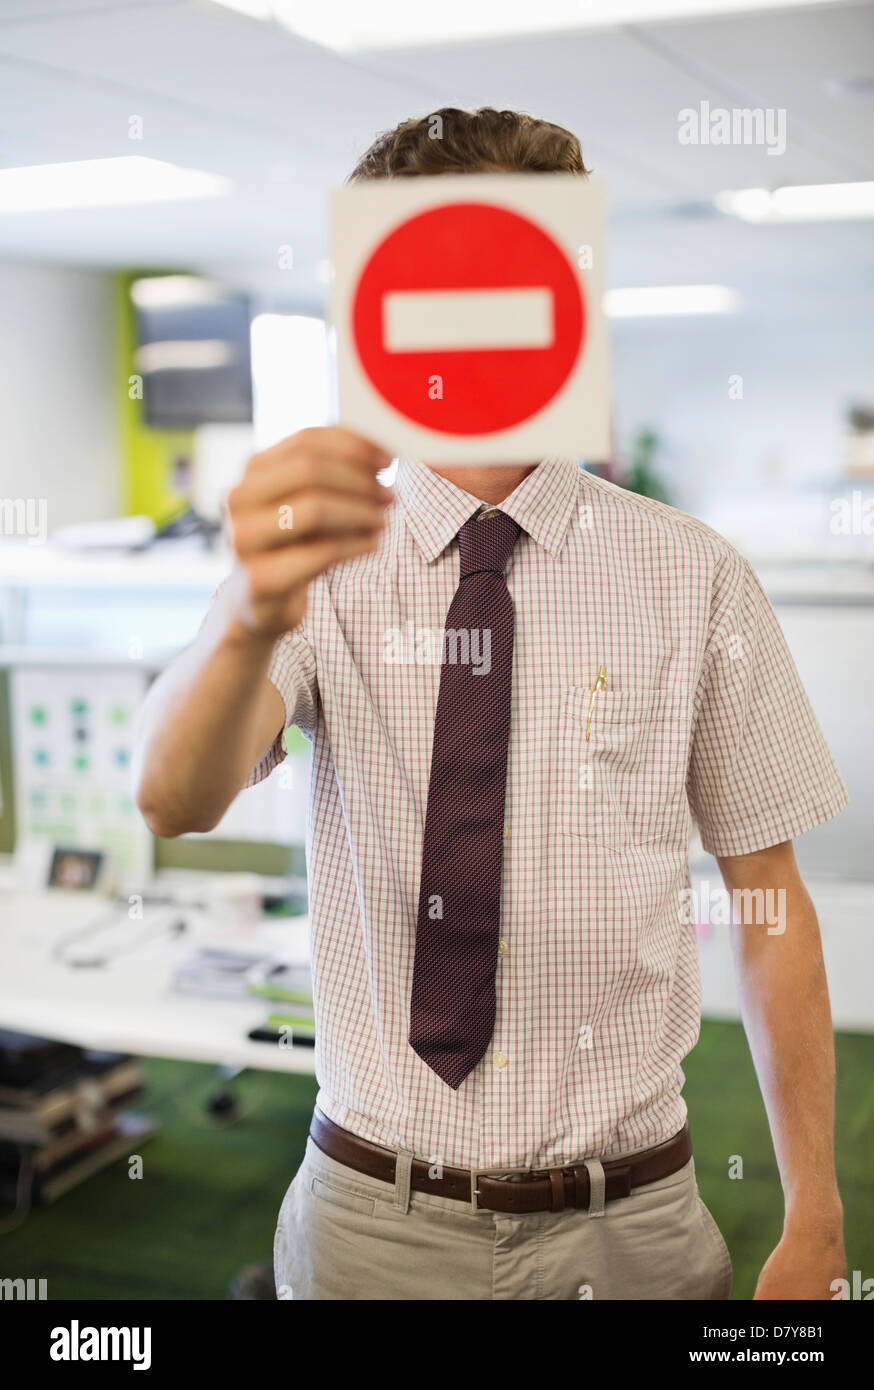 Businessman holding warning sign in office Banque D'Images